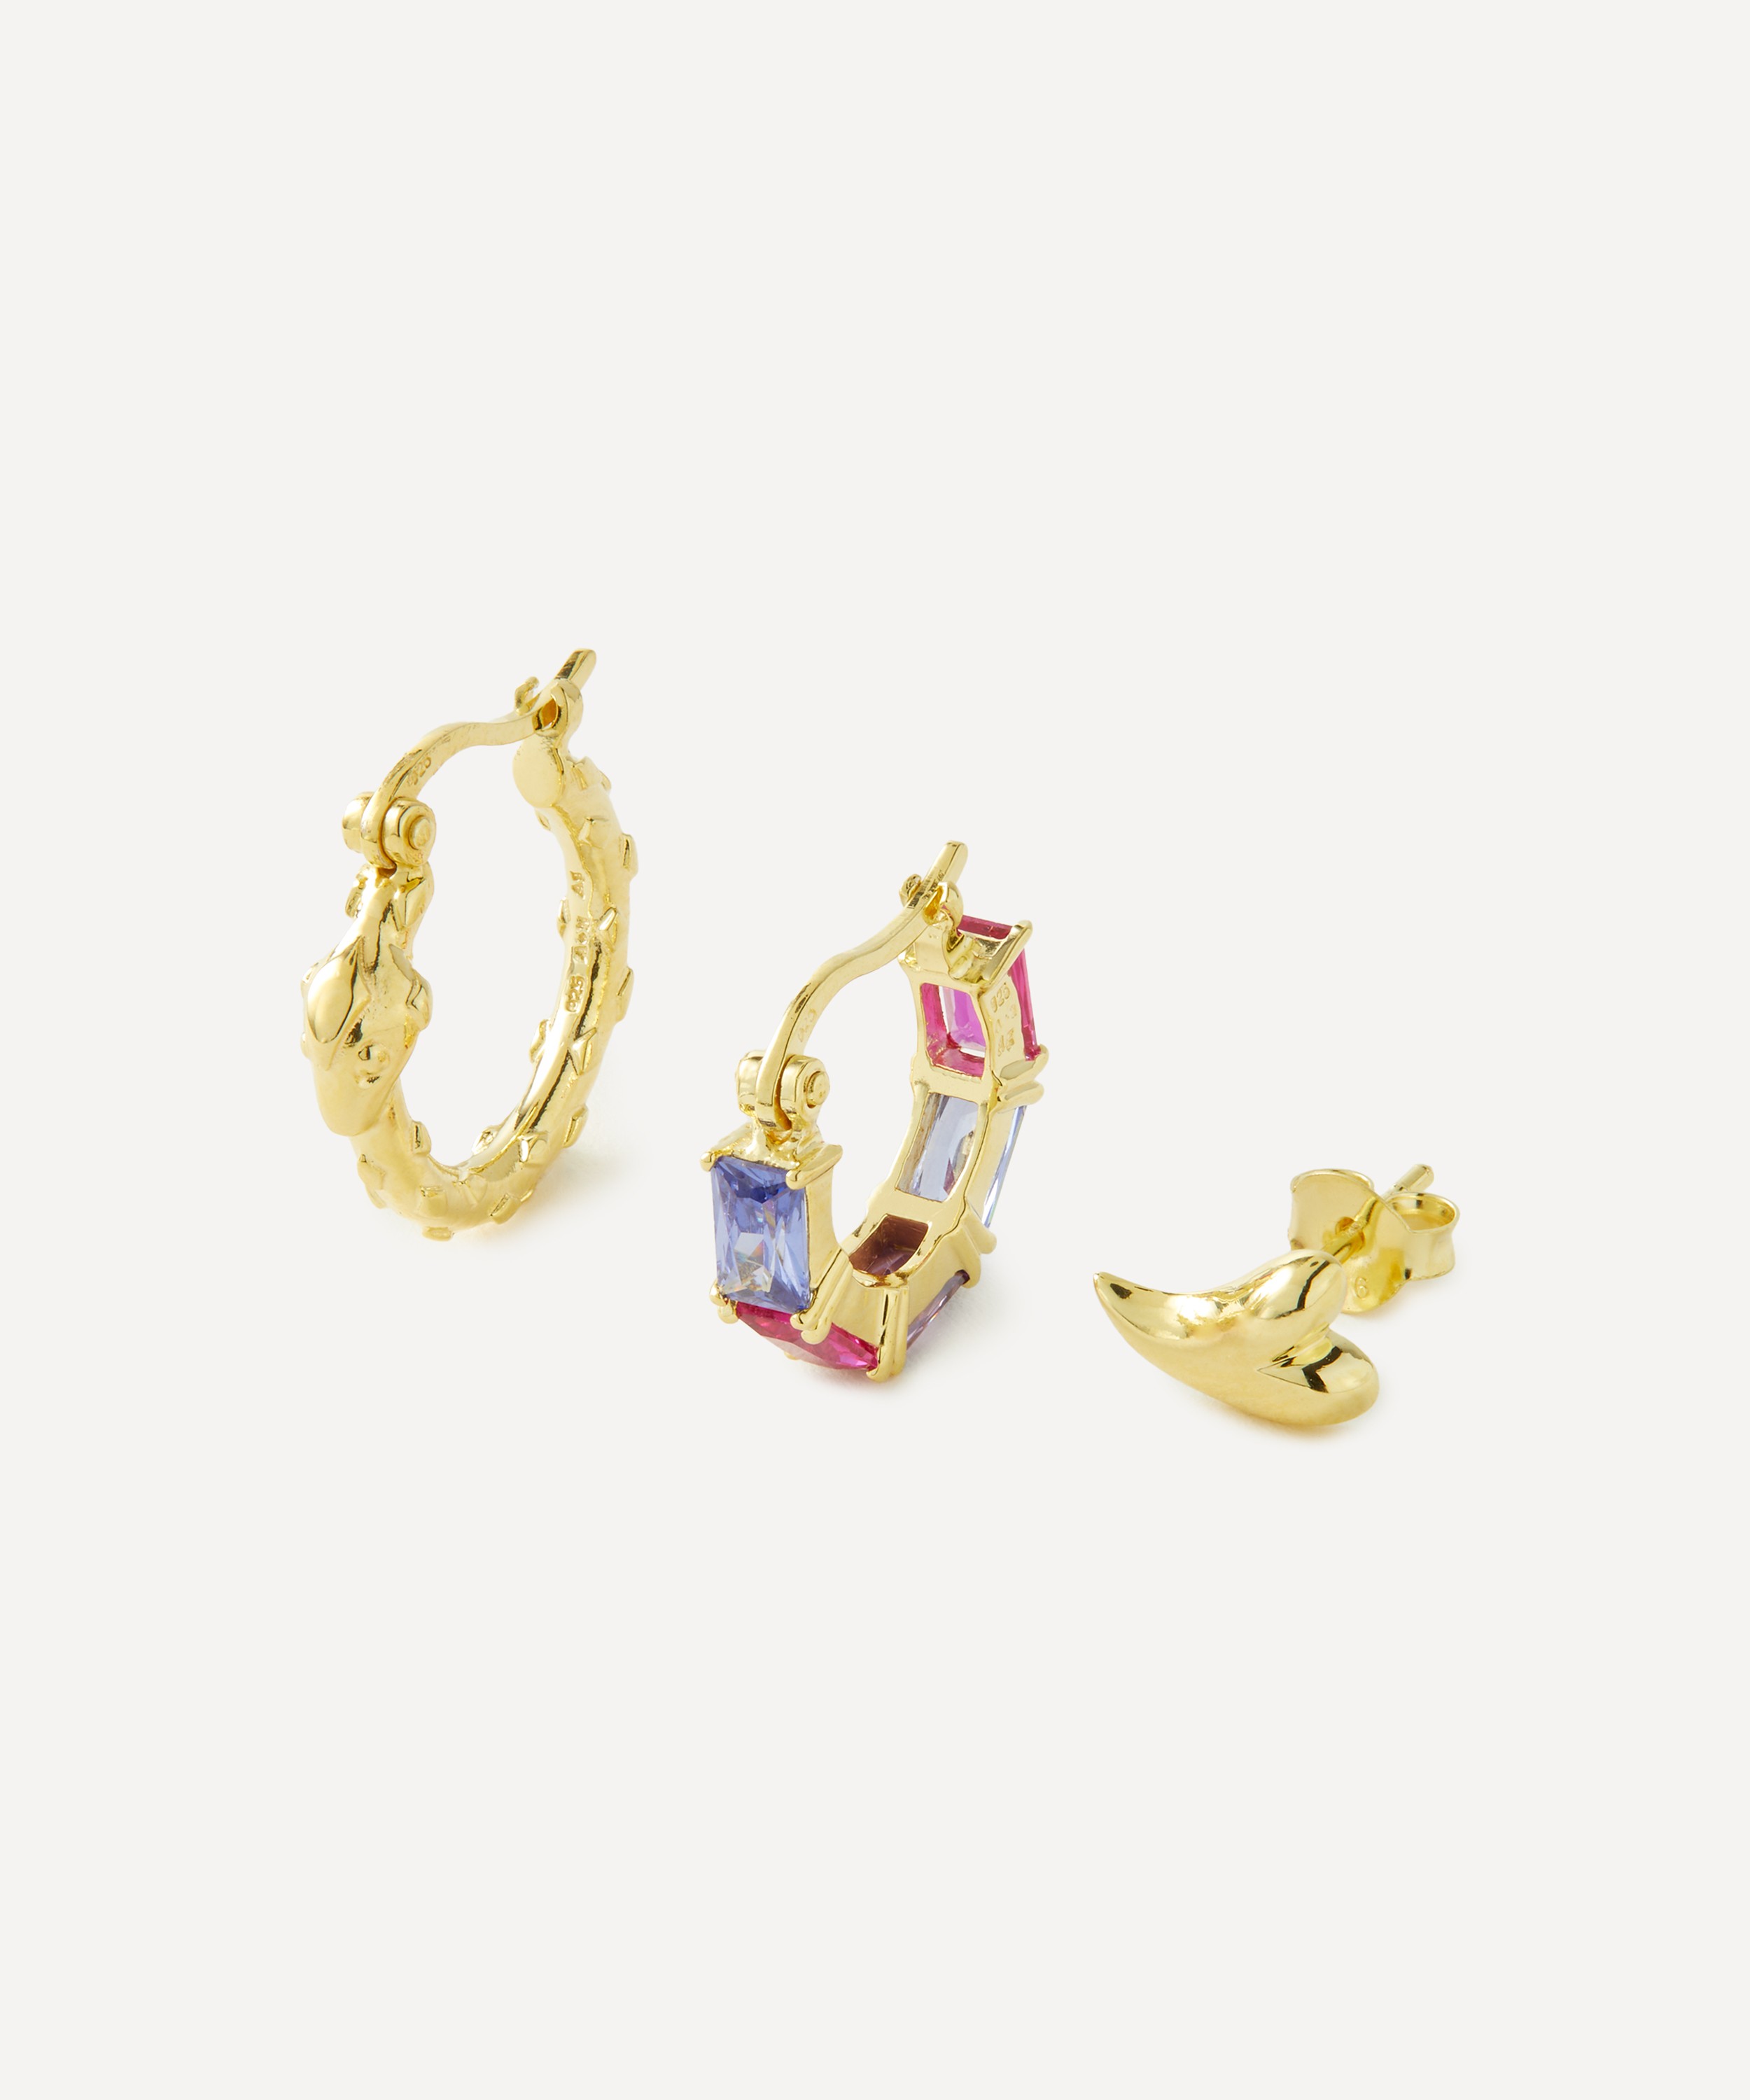 Anna + Nina - 14ct Gold-Plated Serpentine Fire Earrings Set